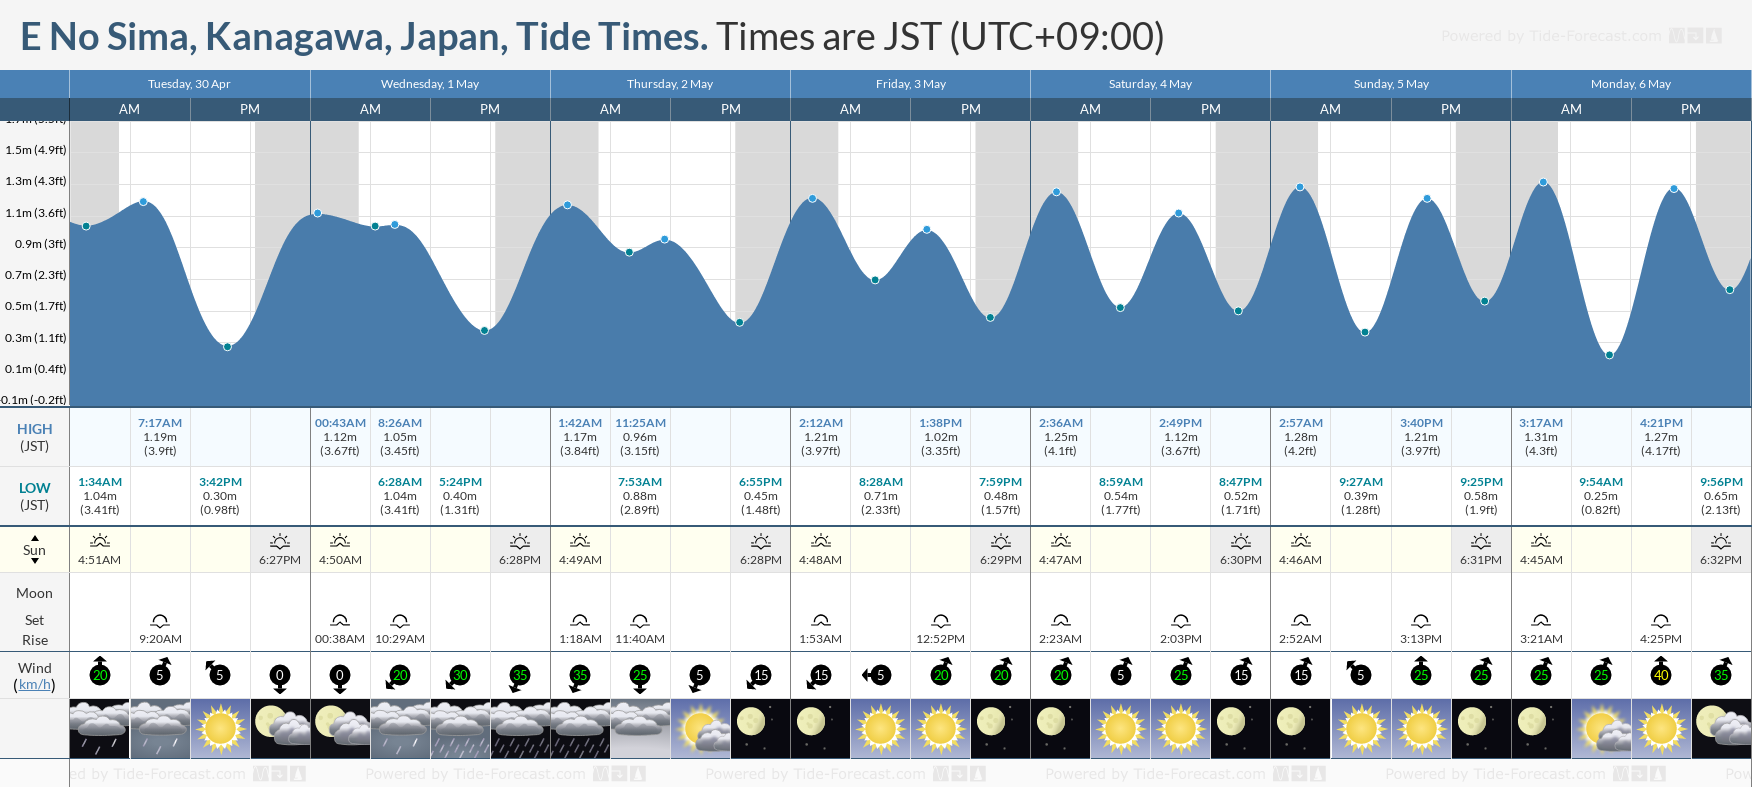 E No Sima, Kanagawa, Japan Tide Chart including high and low tide tide times for the next 7 days